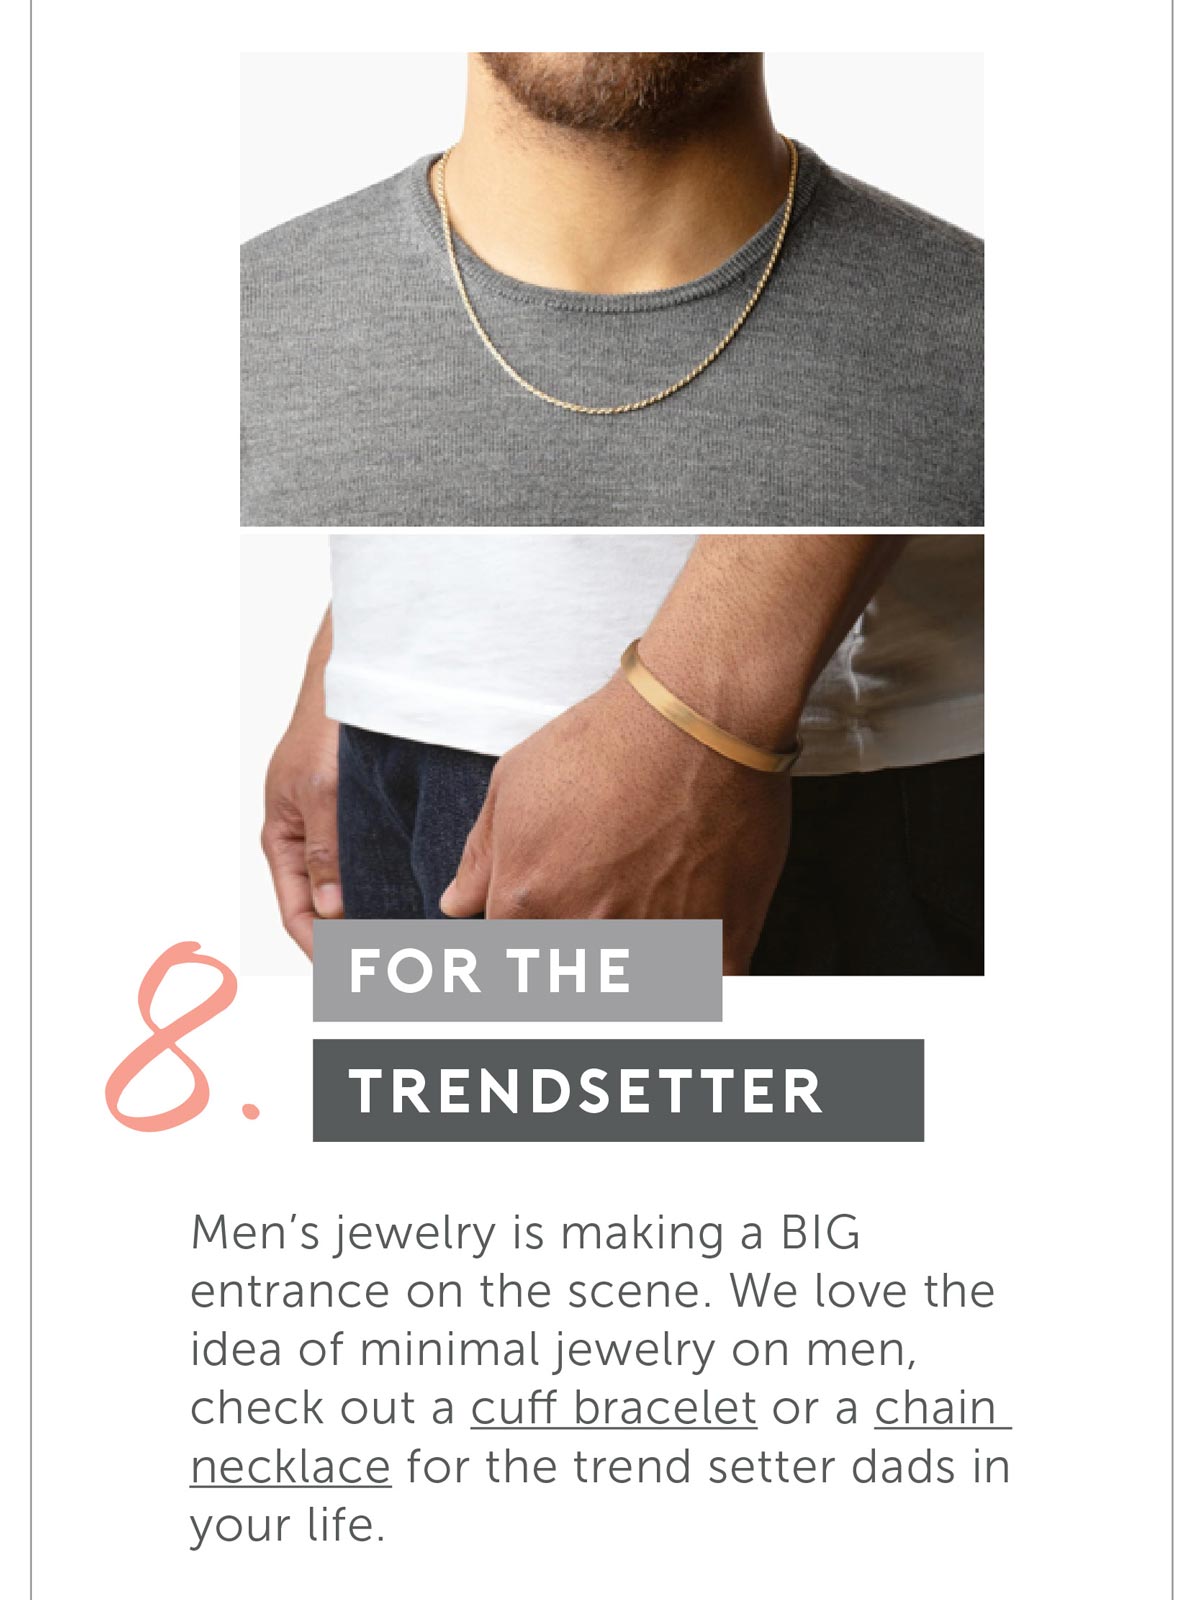 For The Trend Setter. Men’s Jewelry is making a BIG entrance on the scene. We love the idea of minimal jewelry on men, check out a cuff bracelet or a chain necklace for the trend setter dads in your life.